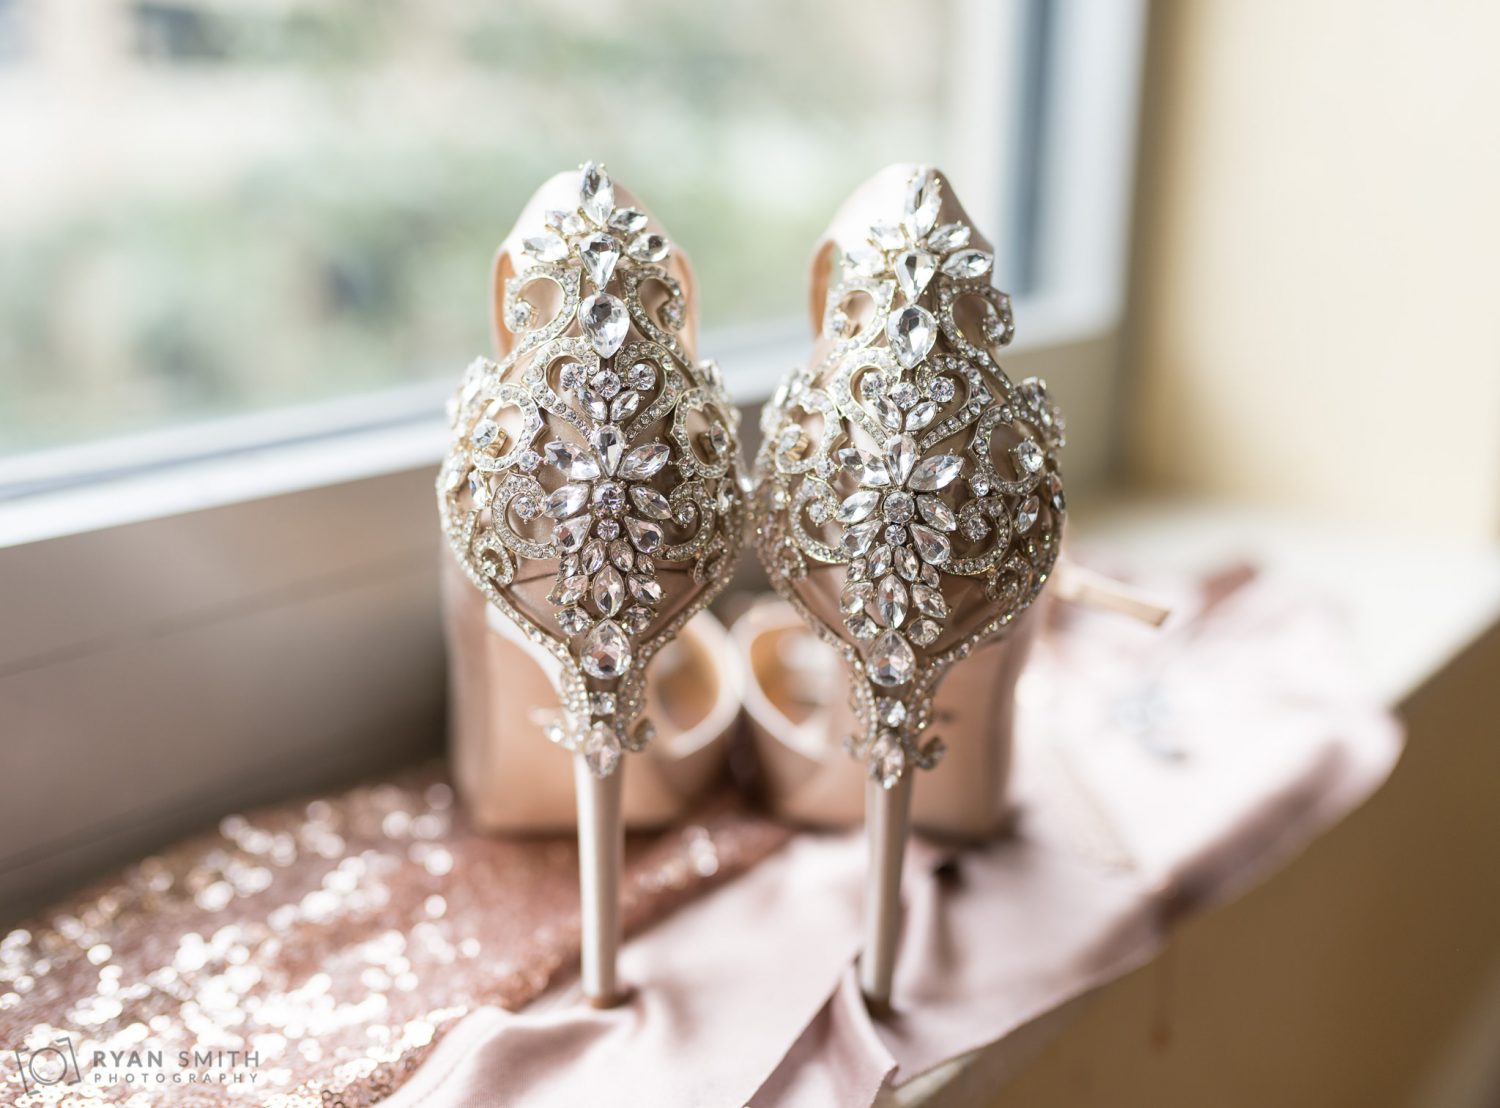 Jeweled bride's shoes sitting in the window Hilton Myrtle Beach Resort